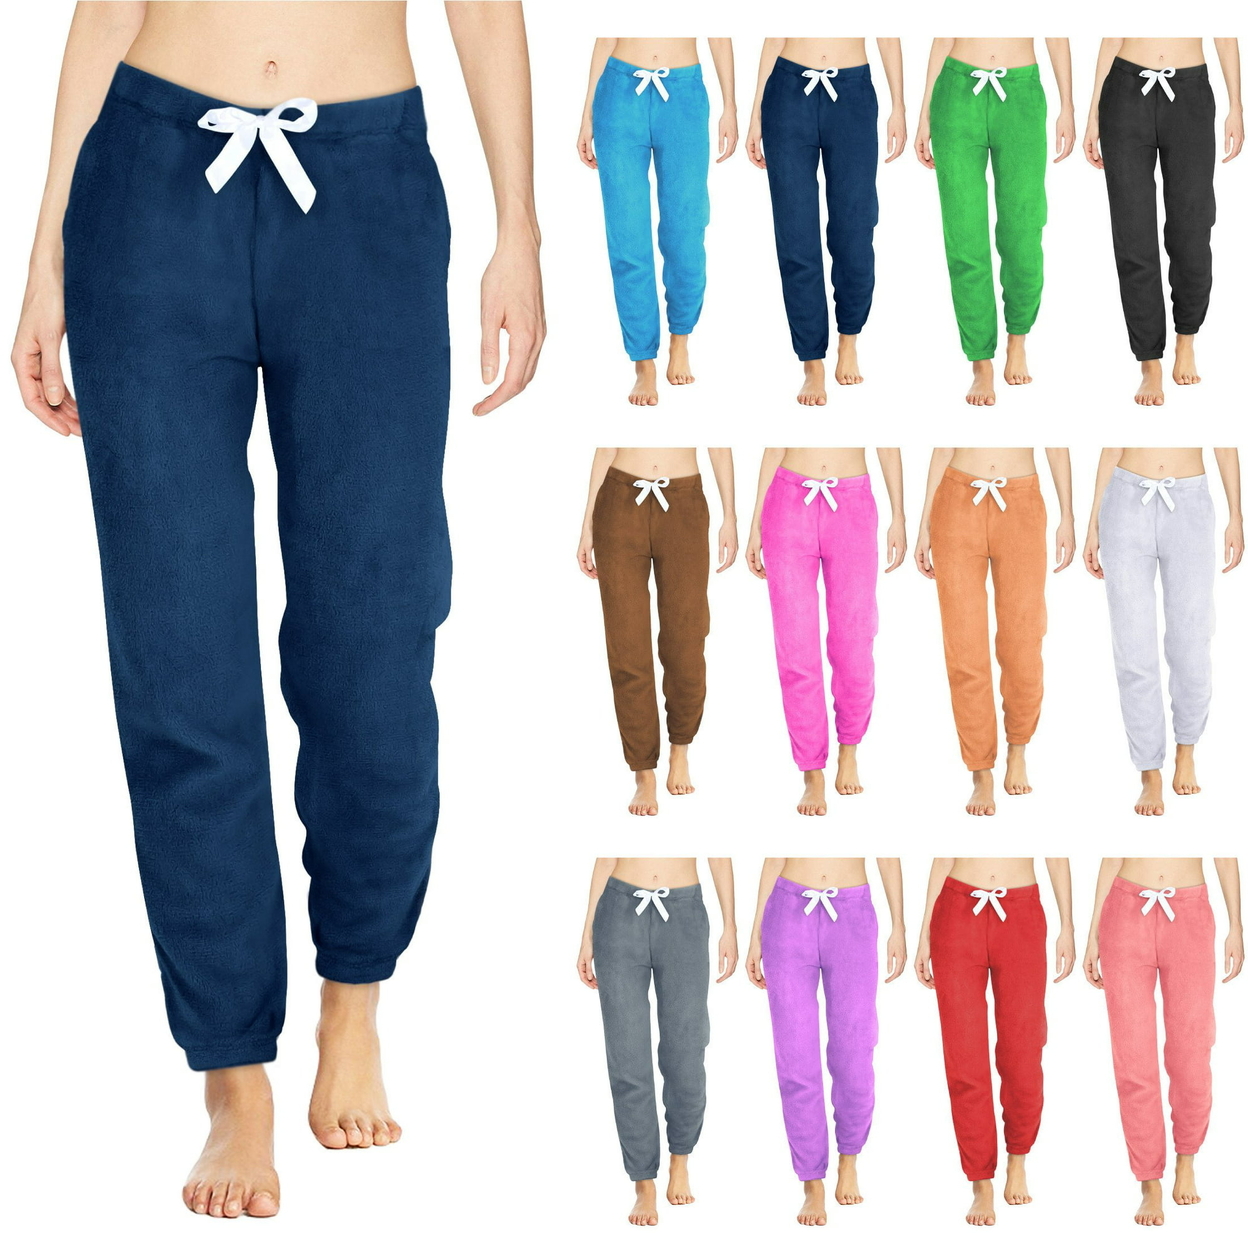 Multi-Pack: Women's Solid & Printed Ultra-Soft Comfy Stretch Micro-Fleece Pajama Lounge Pants - 3-pack, Large, Shapes